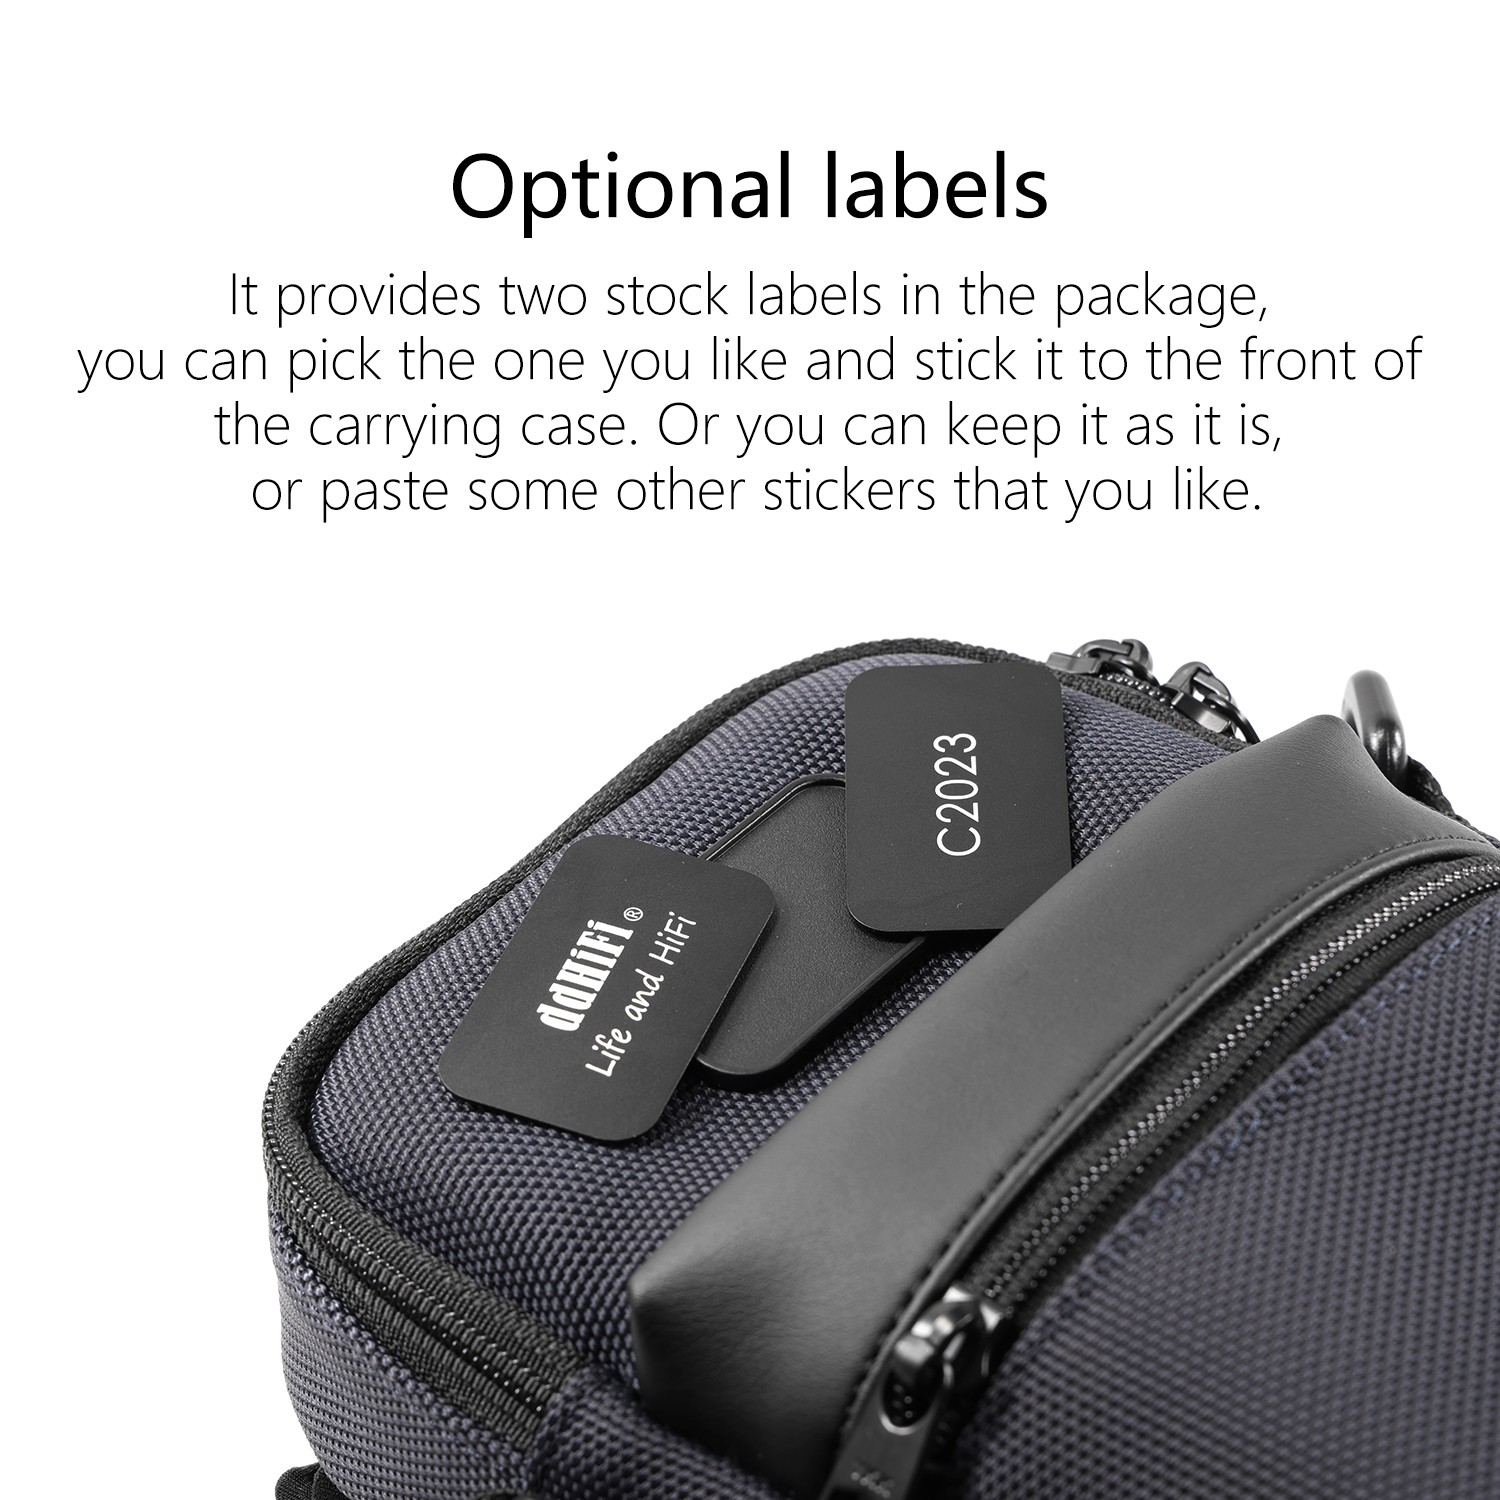 DD ddHiFi C2023 optional labels for carrying case